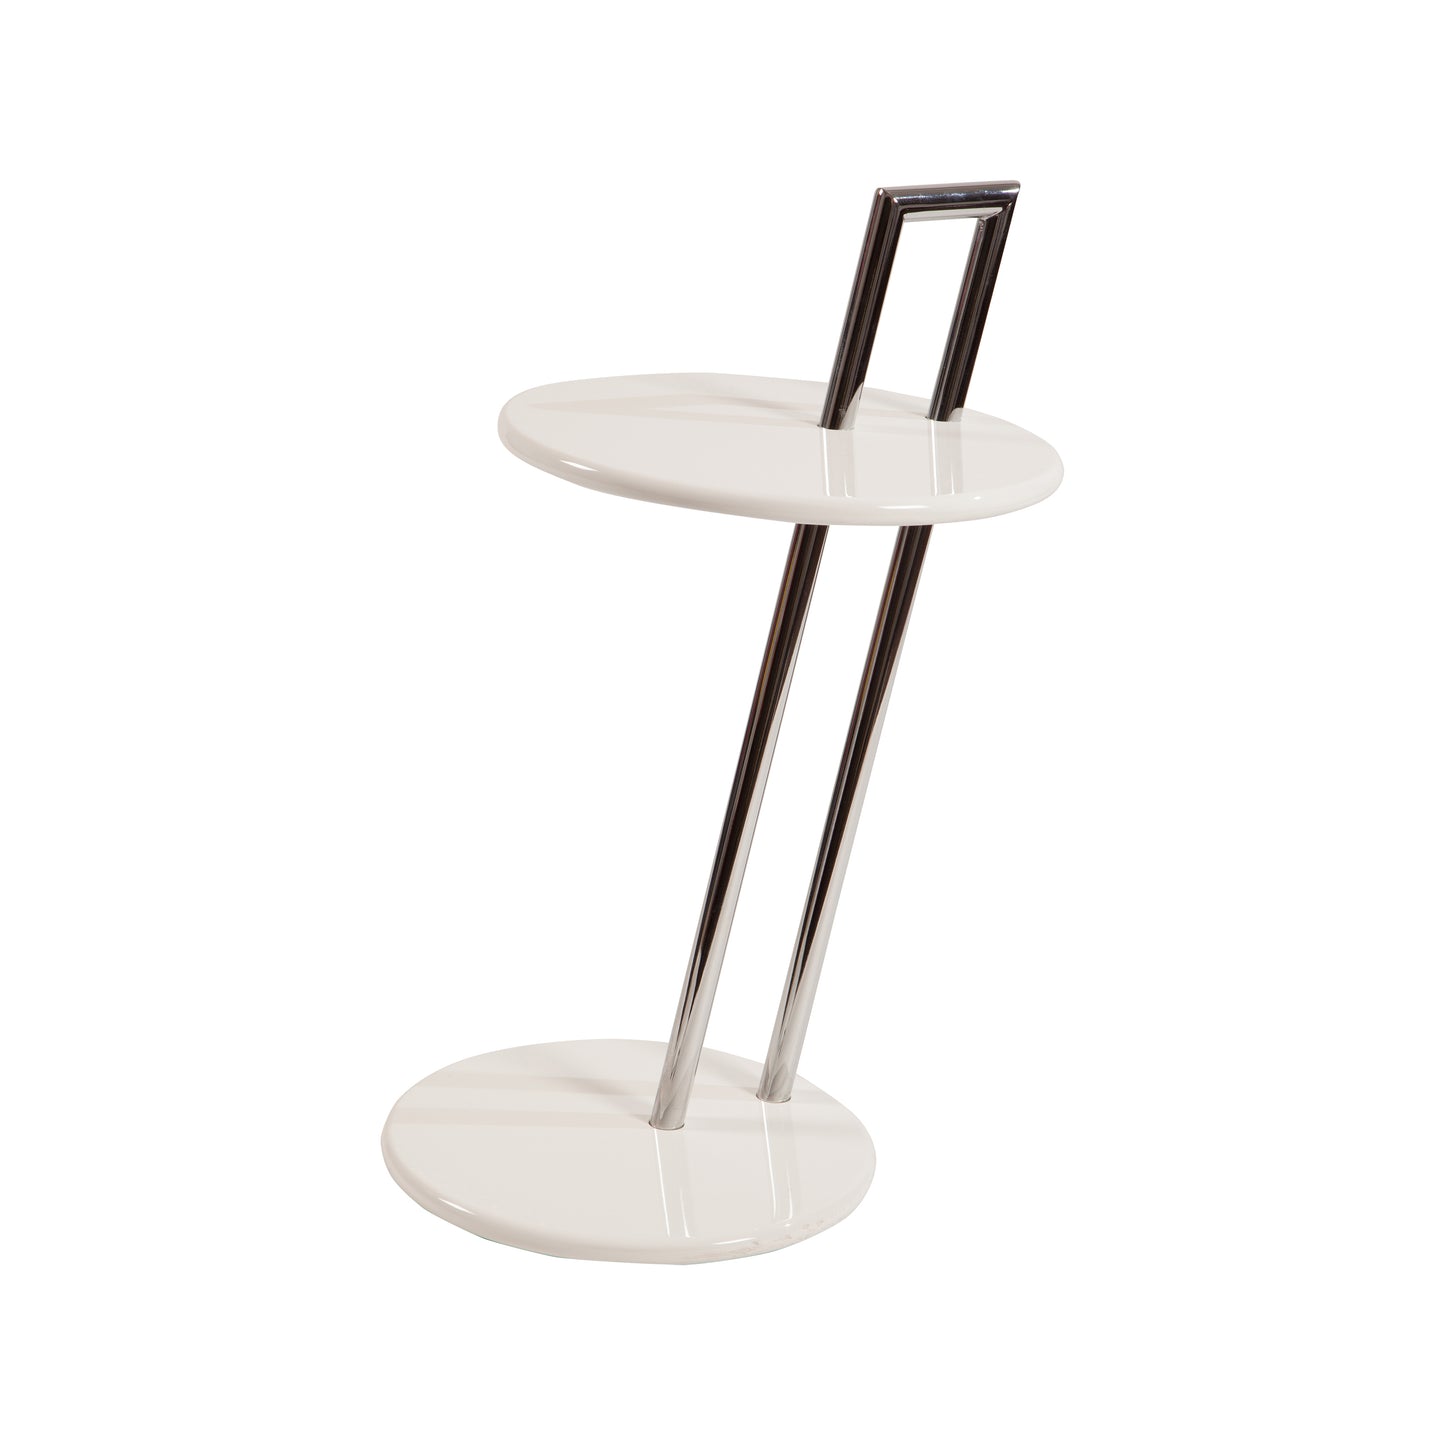 The occasional table style | White | Side